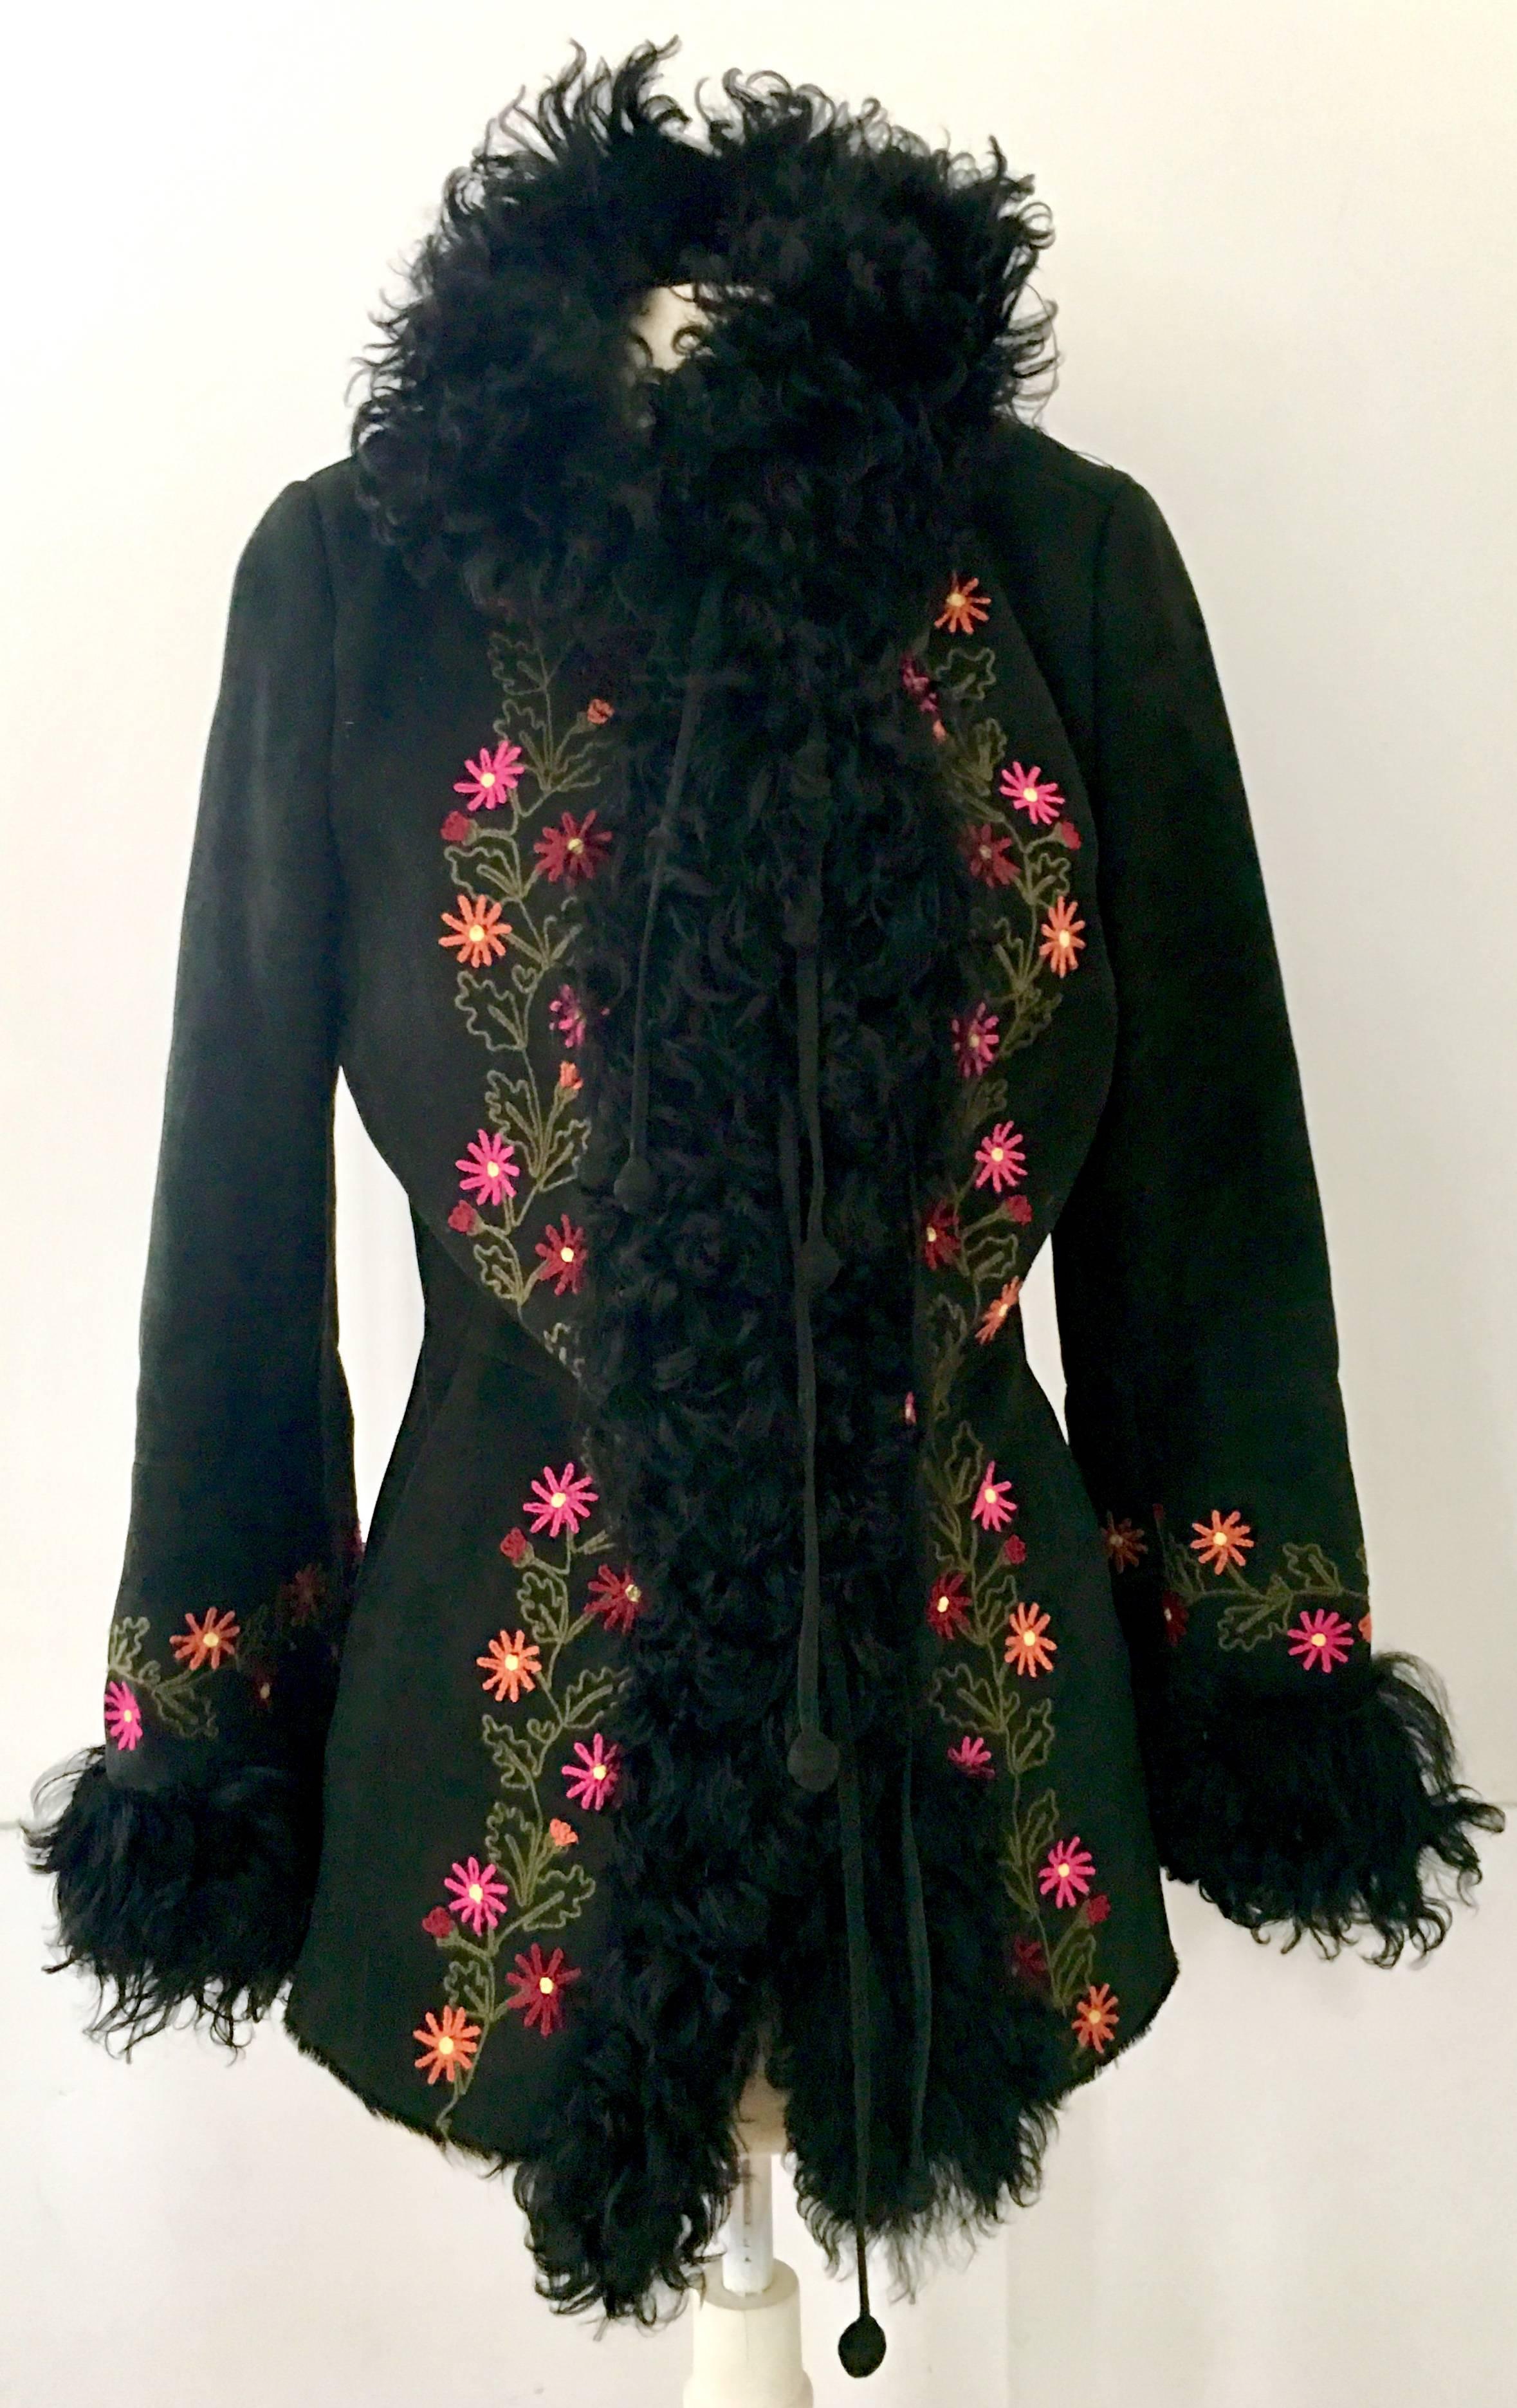 20th Century Fantastic & Pristine Italian Contemporary Black cut leather shearling with Black Curly Mongolian detail and vibrant colored embroidered flower motif coat. This form fitted piece features fine leather suede with high quality curly